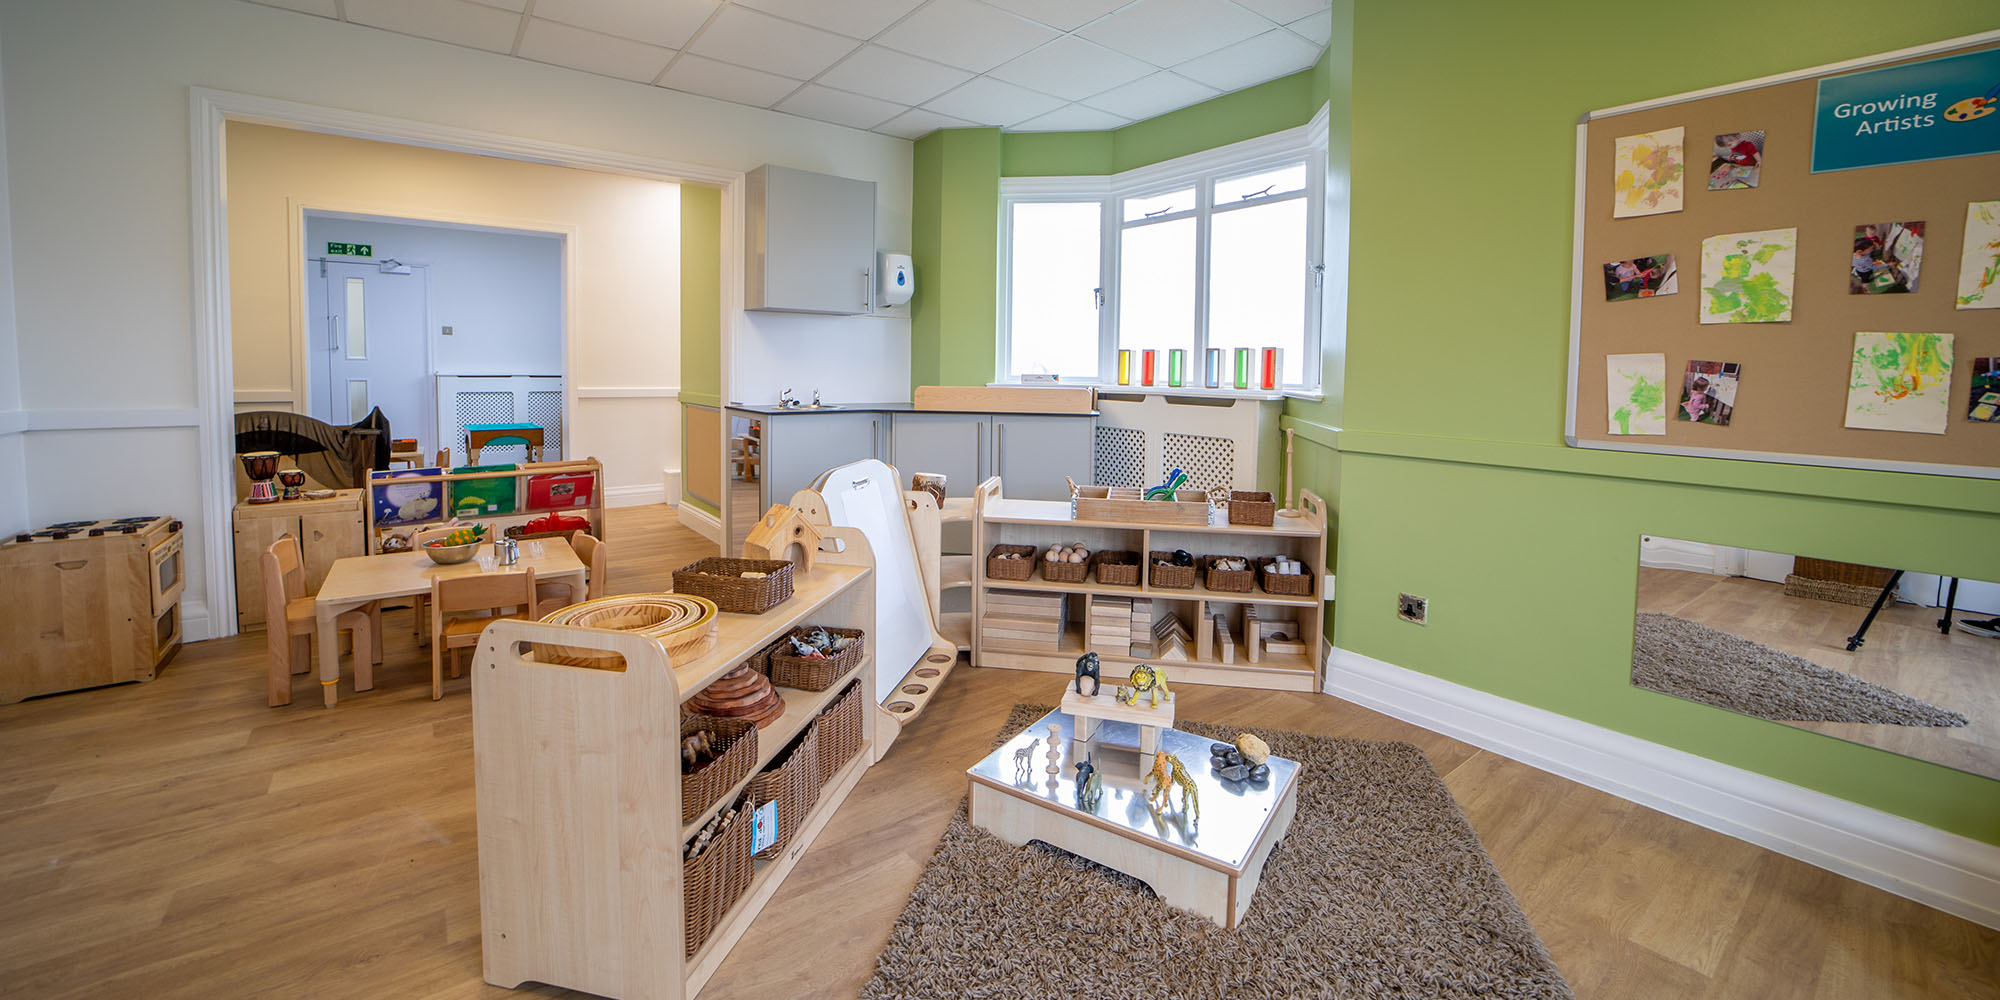 Toddler Room - Chandlers Ford Day Nursery and Preschool